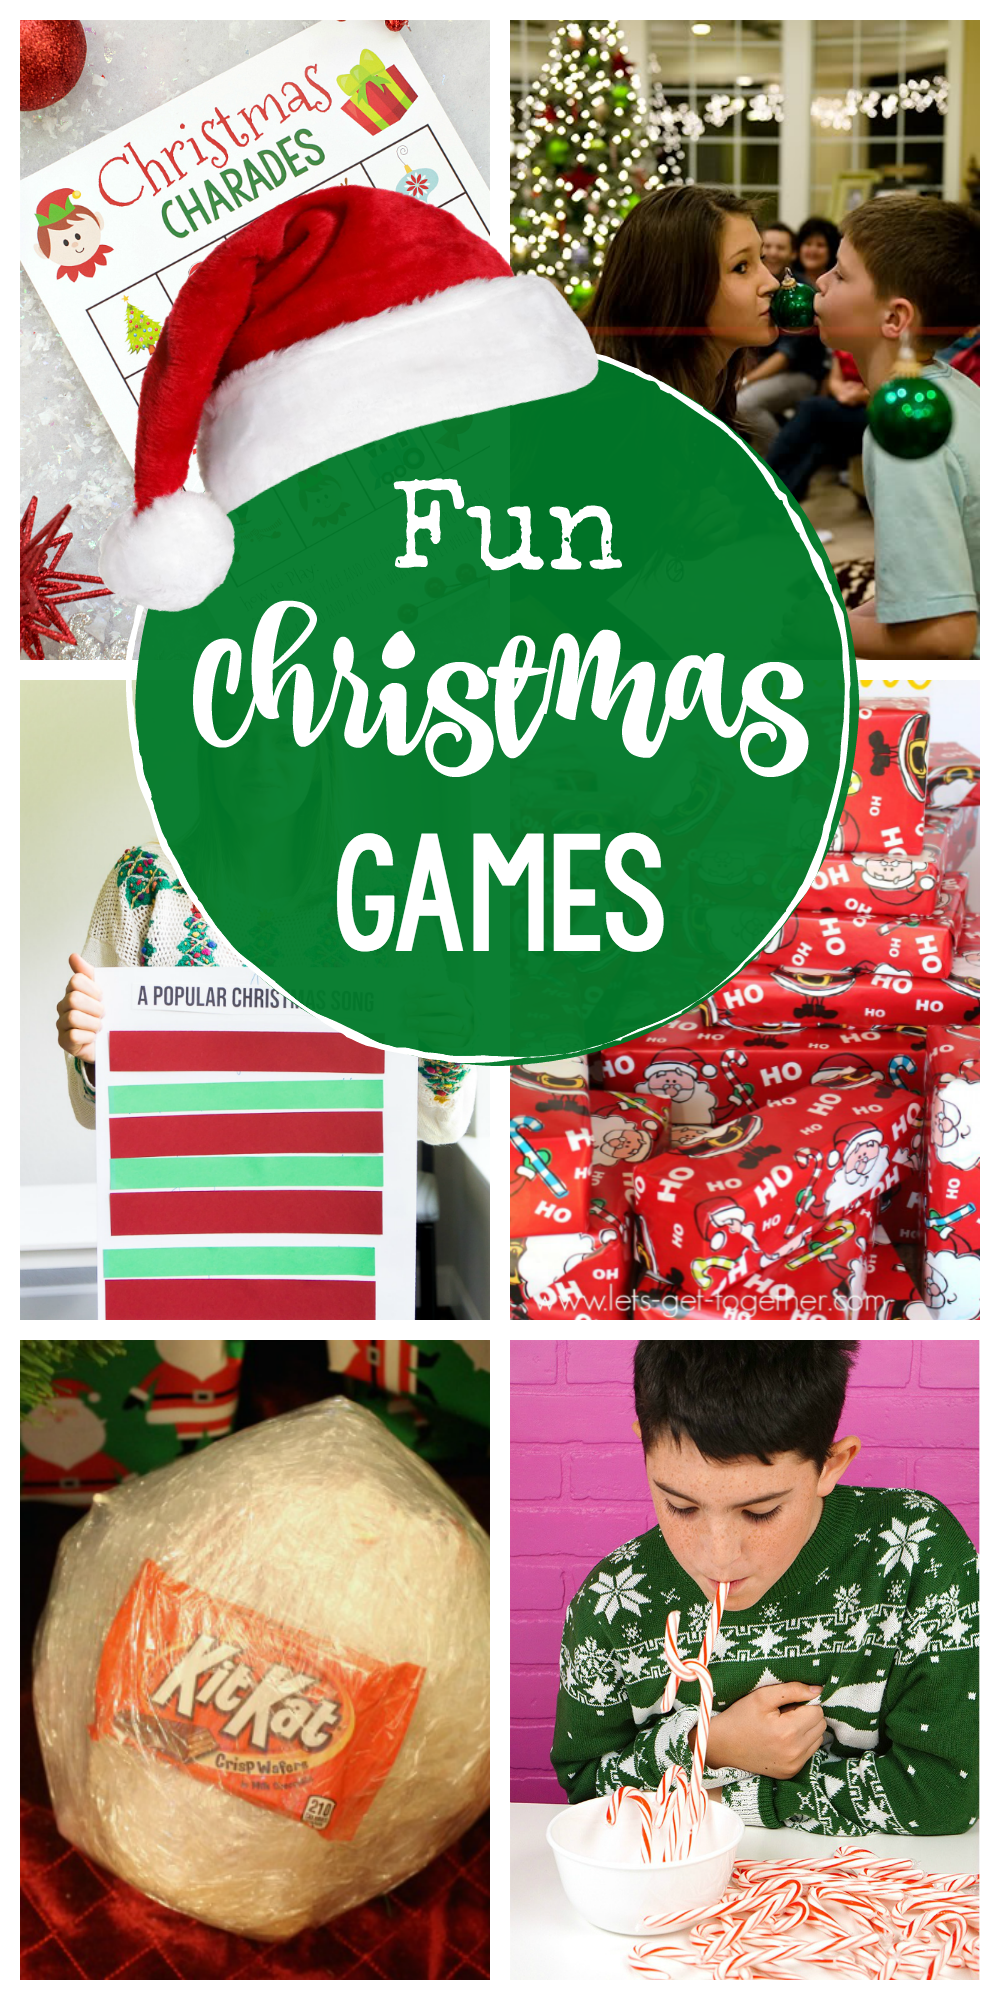 Fun Christmas Games for Your Holiday Parties - Fun Christmas Games for Your Holiday Parties -   17 diy Christmas games ideas